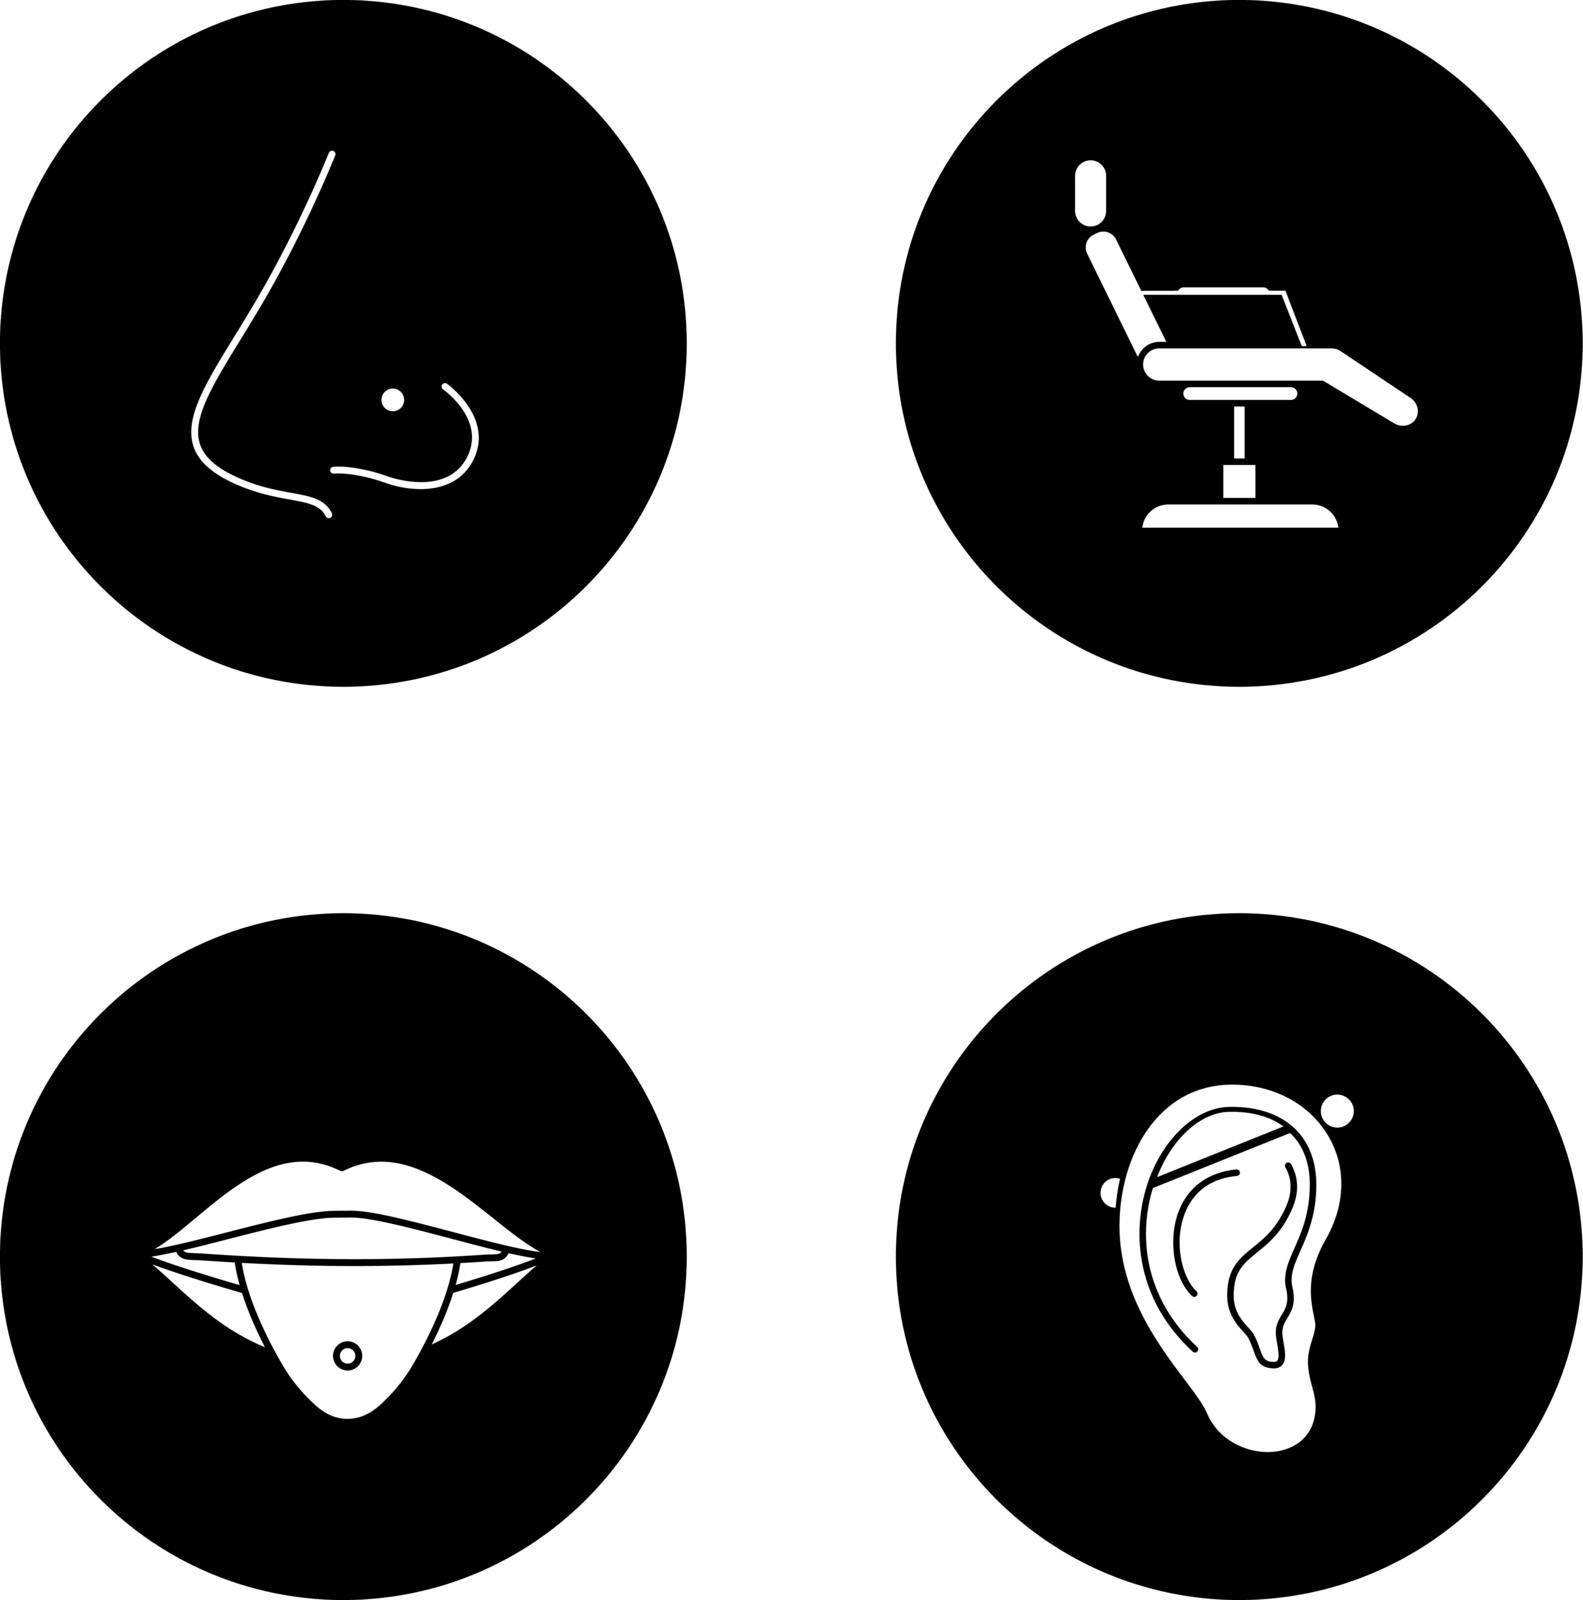 Tattoo studio glyph icons set. Piercing service. Pierced nose and tongue, tattoo chair, industrial piercing. Vector white silhouettes illustrations in black circles